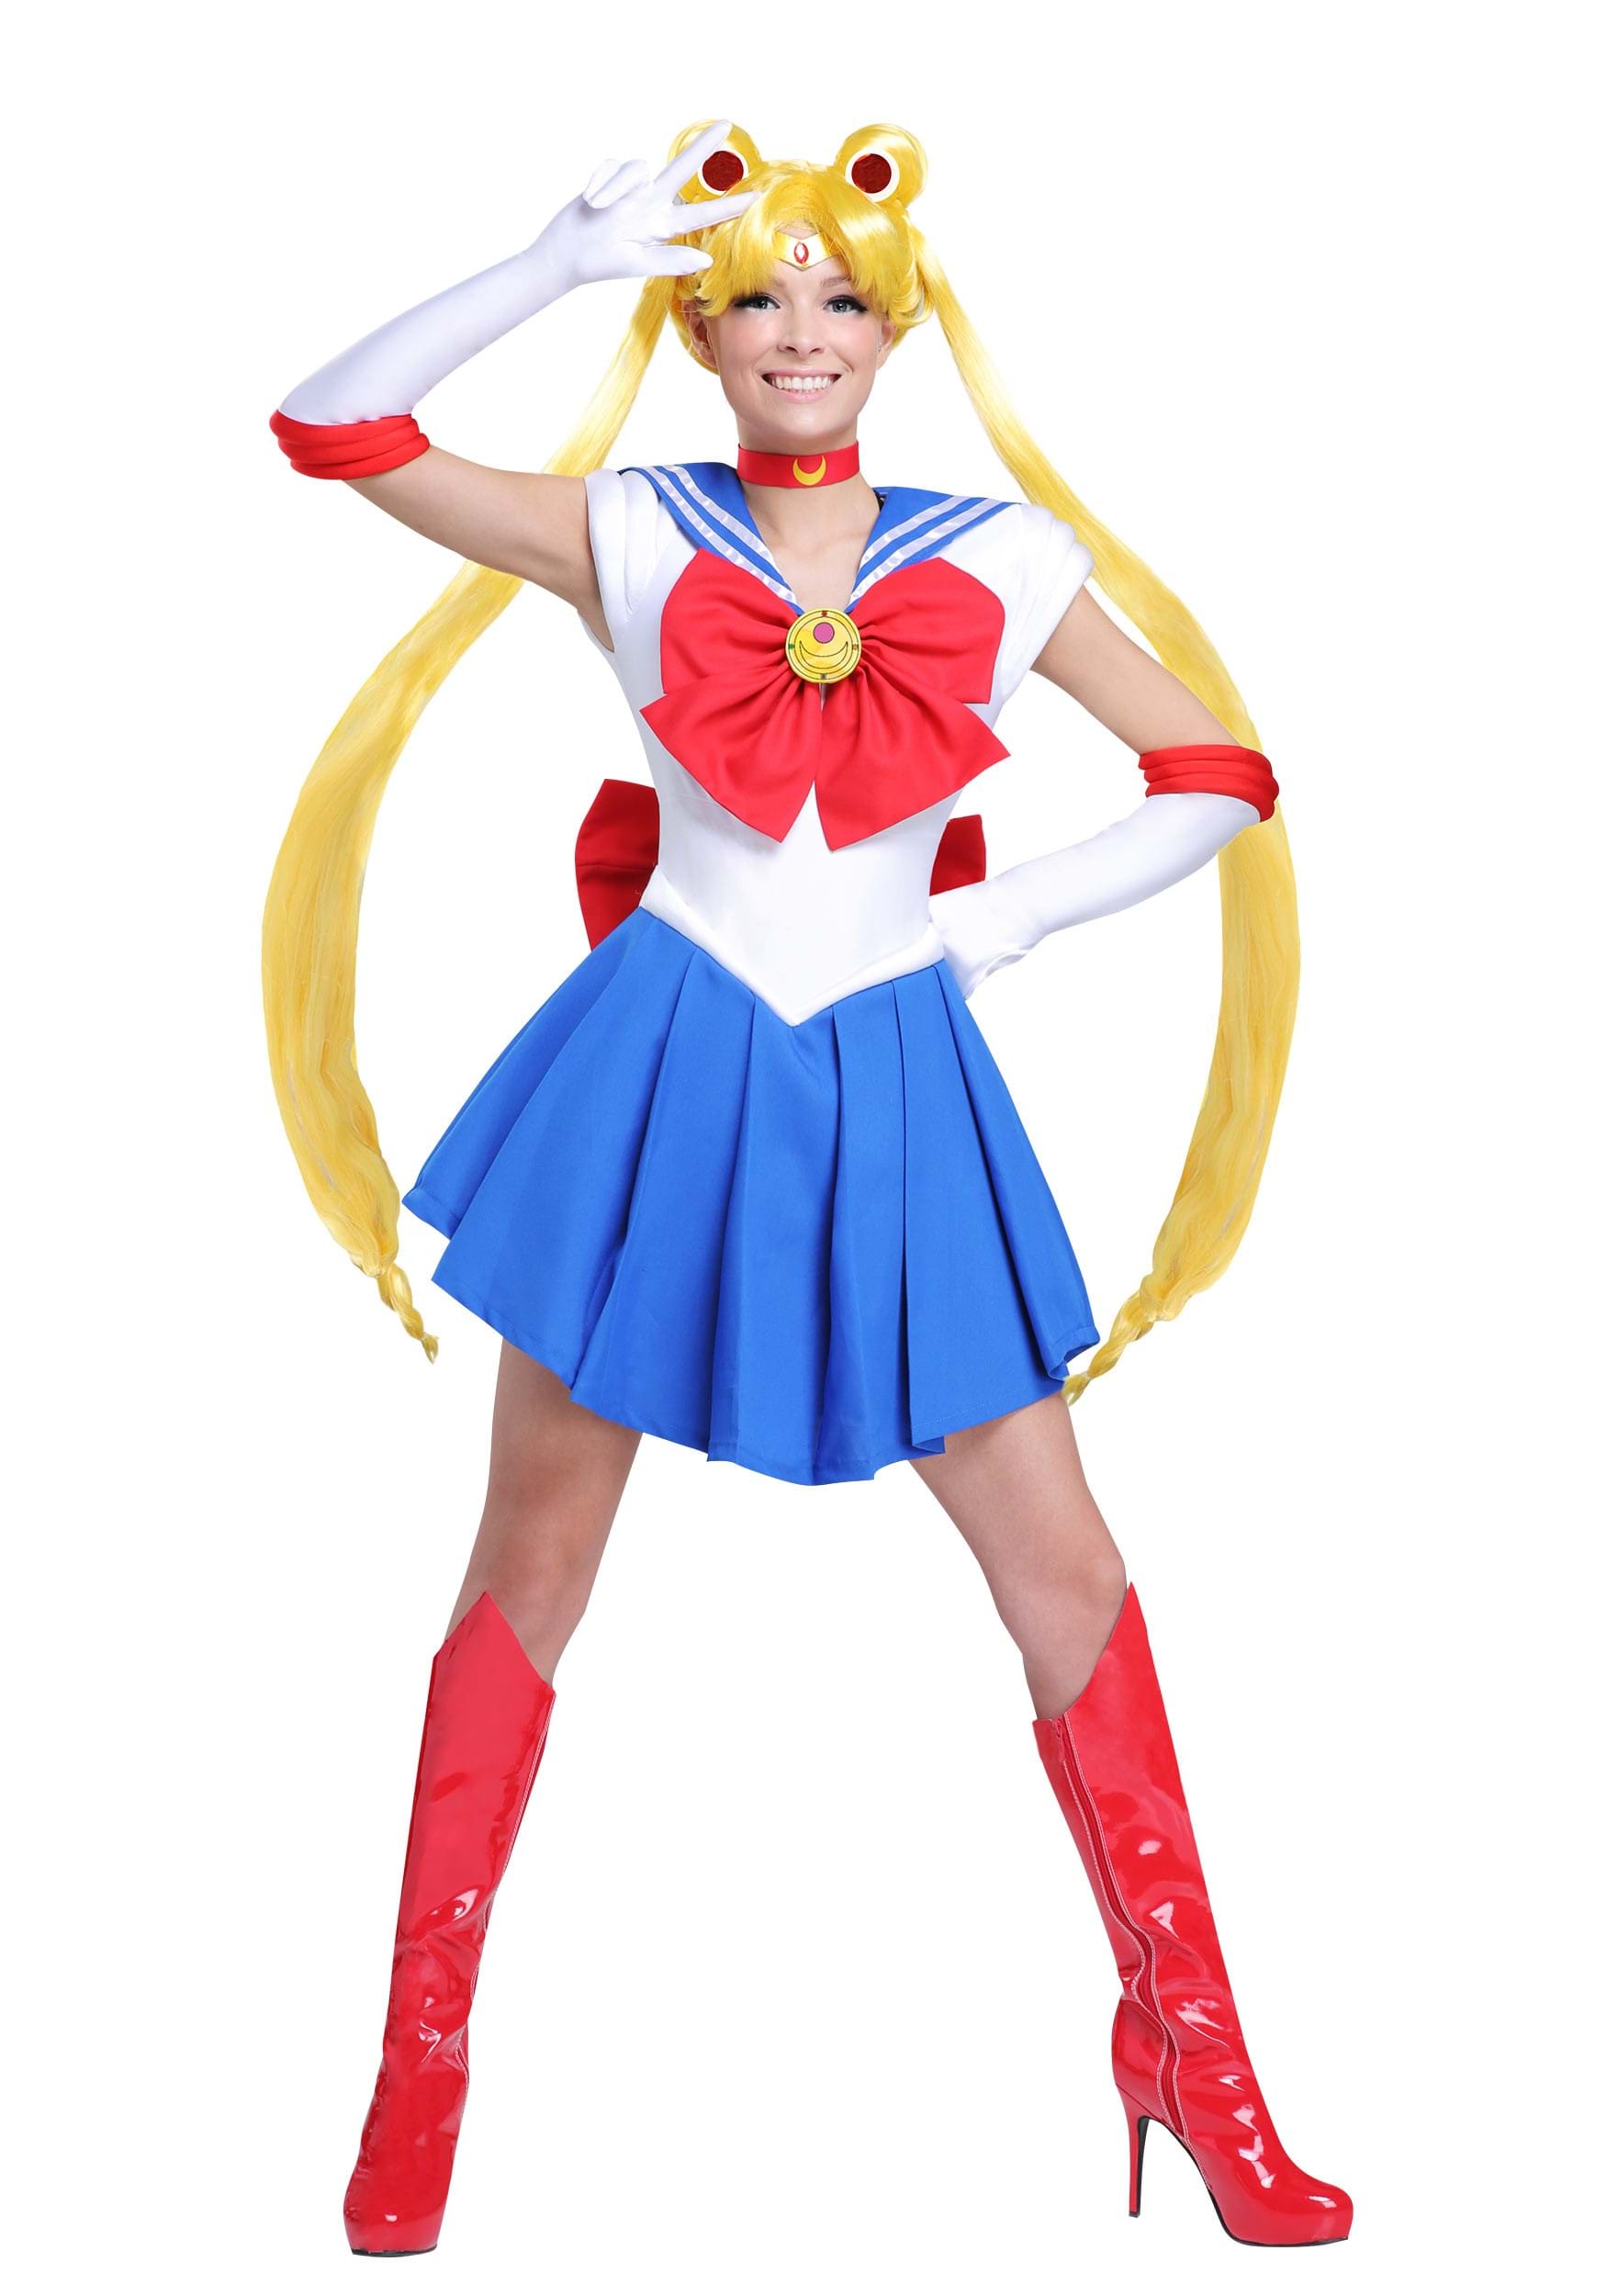 Photos - Fancy Dress MOON FUN Costumes The Sailor  Costume Blue/Red/White FUN6293AD 